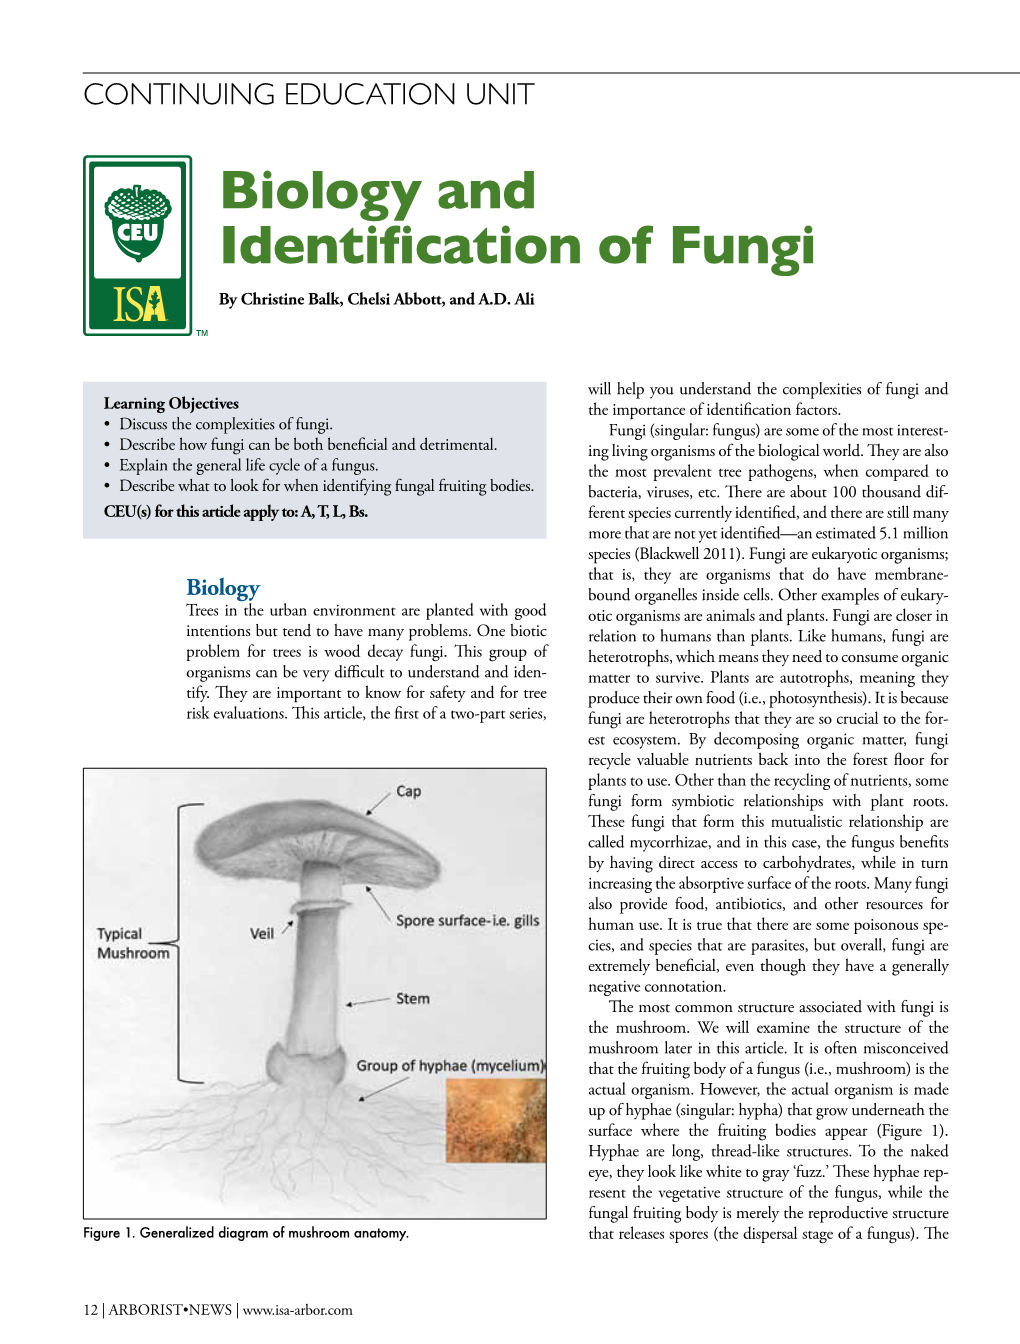 Biology and Identification of Fungi by Christine Balk, Chelsi Abbott, and A.D